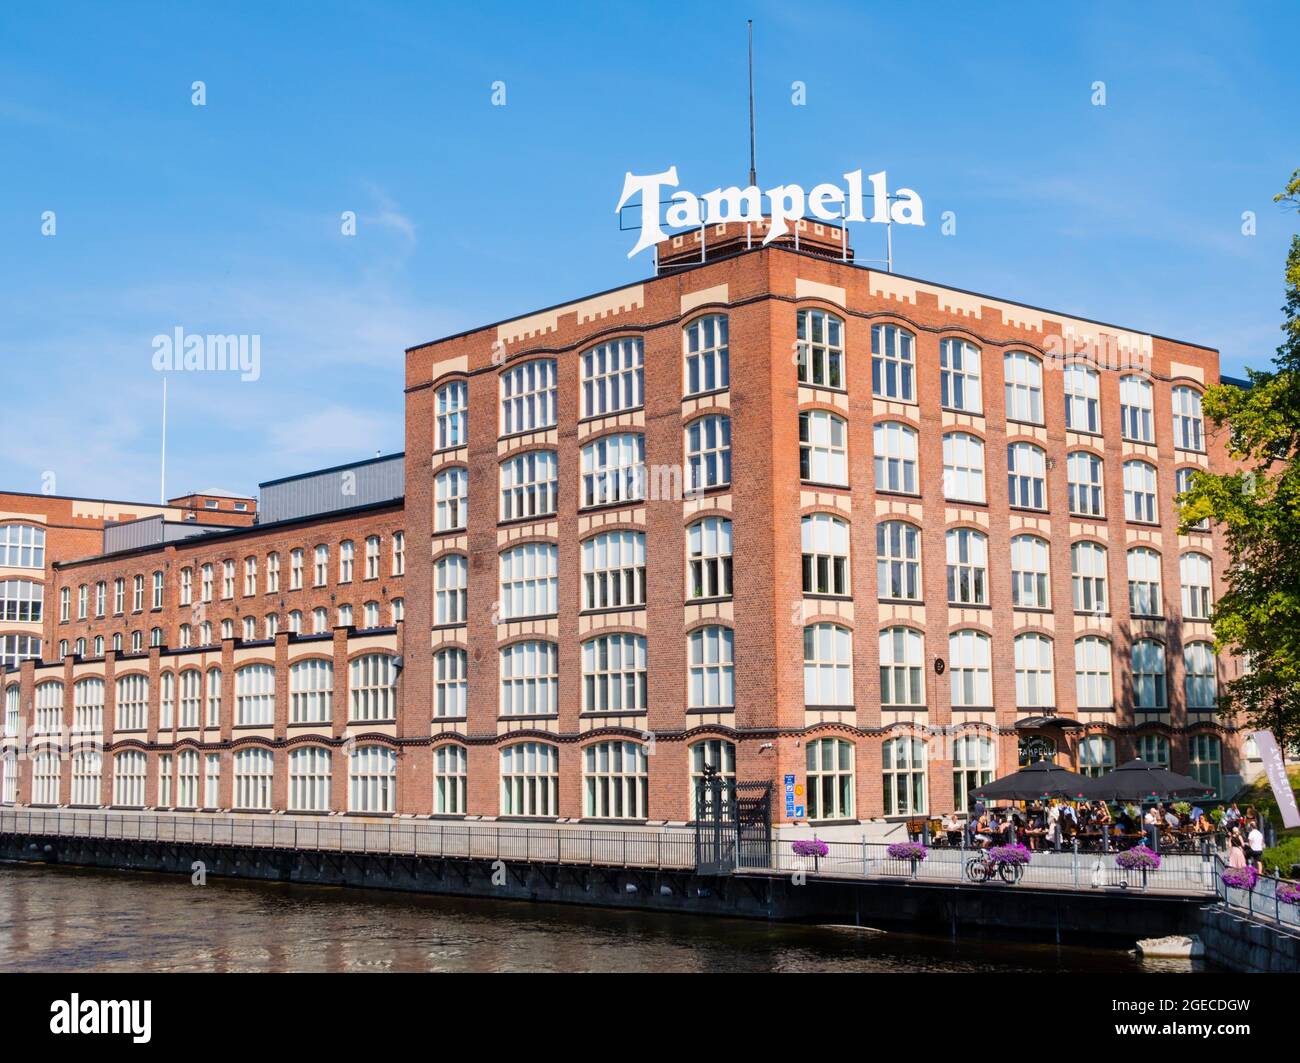 Tampella, former factory houses restaurant, court house, and museums, Tampere, Finland Stock Photo